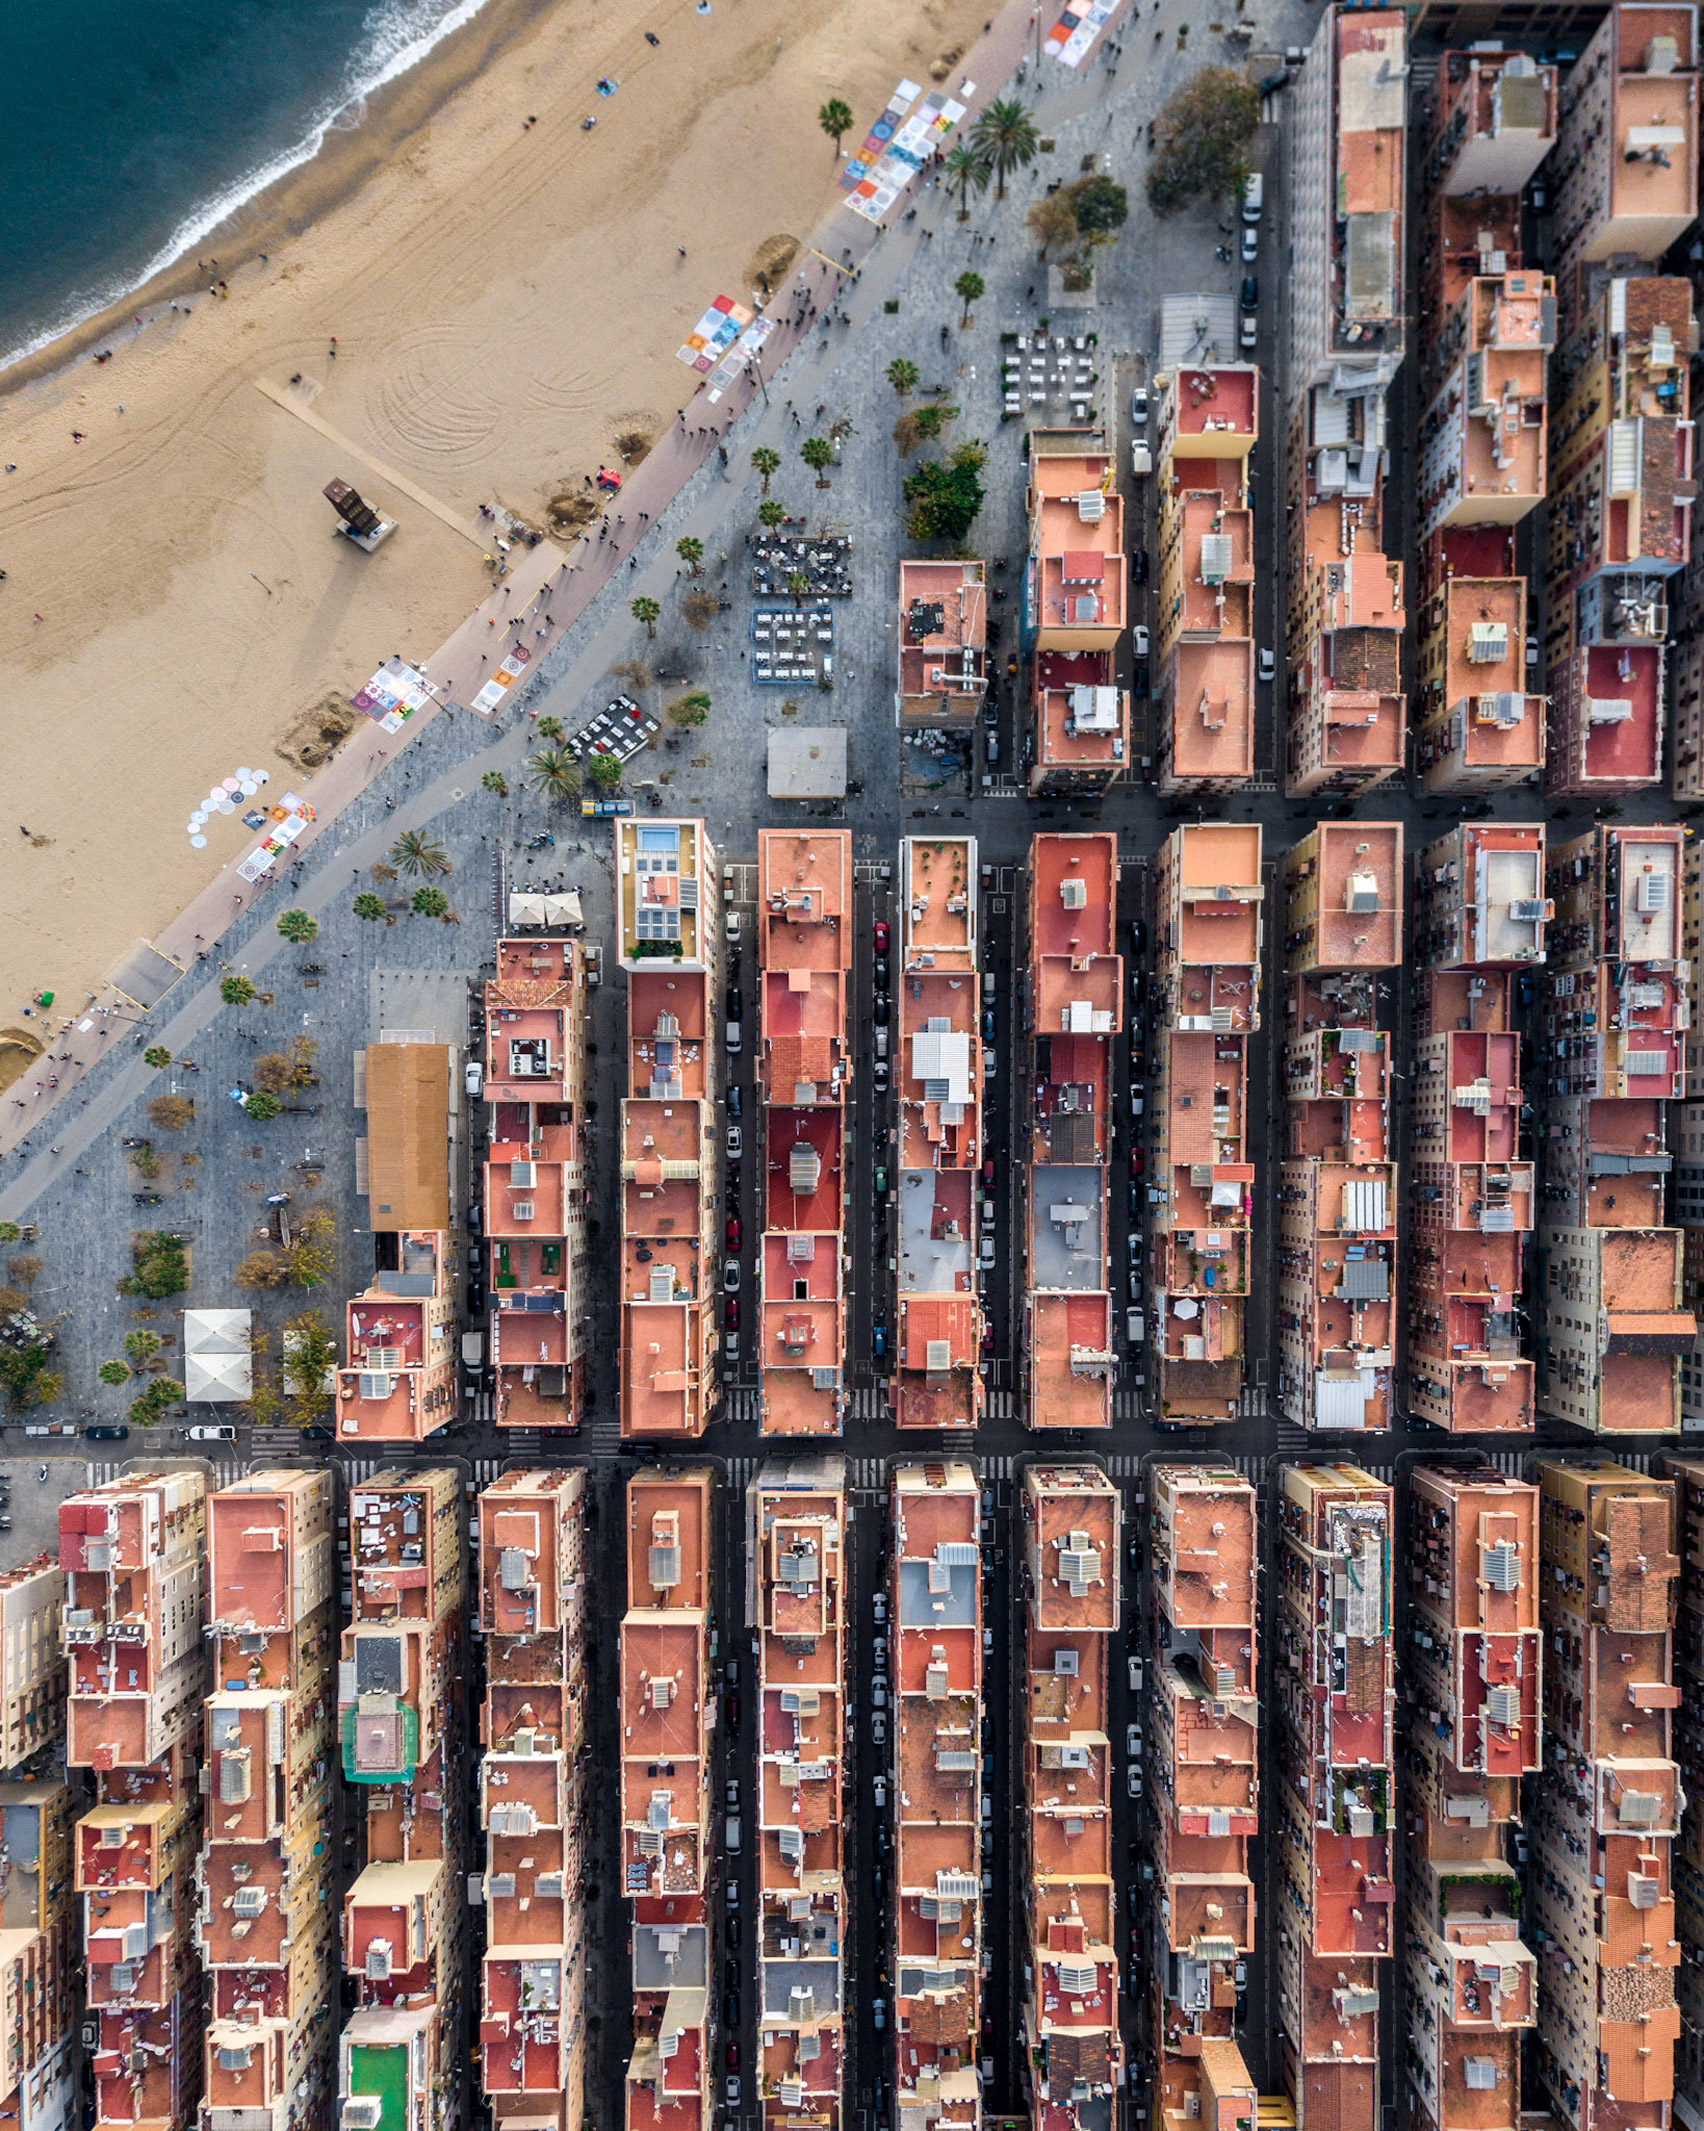 Hungarian photographer Márton Mogyorósy used a drone to capture aerial shots of Barcelona, including Rocardo Bofill's Walden 7